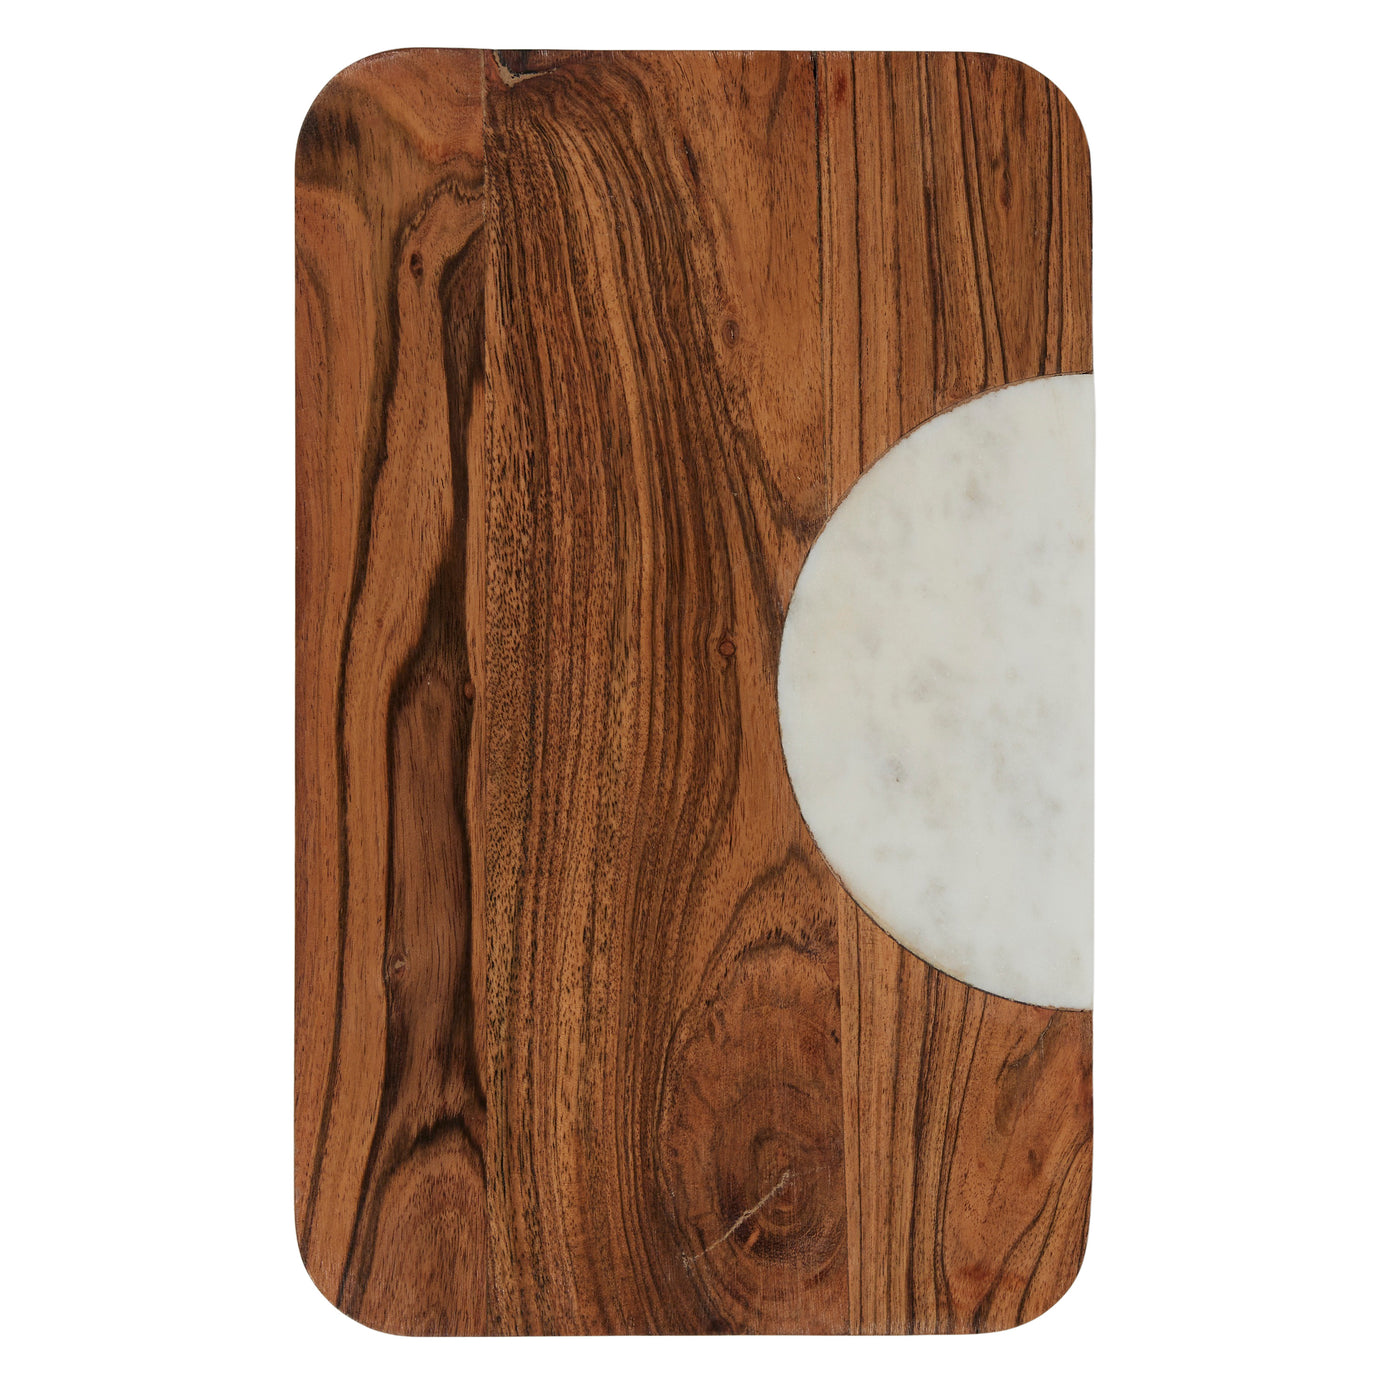 Endor Marble/Wood Board 20x32cm Natural/White